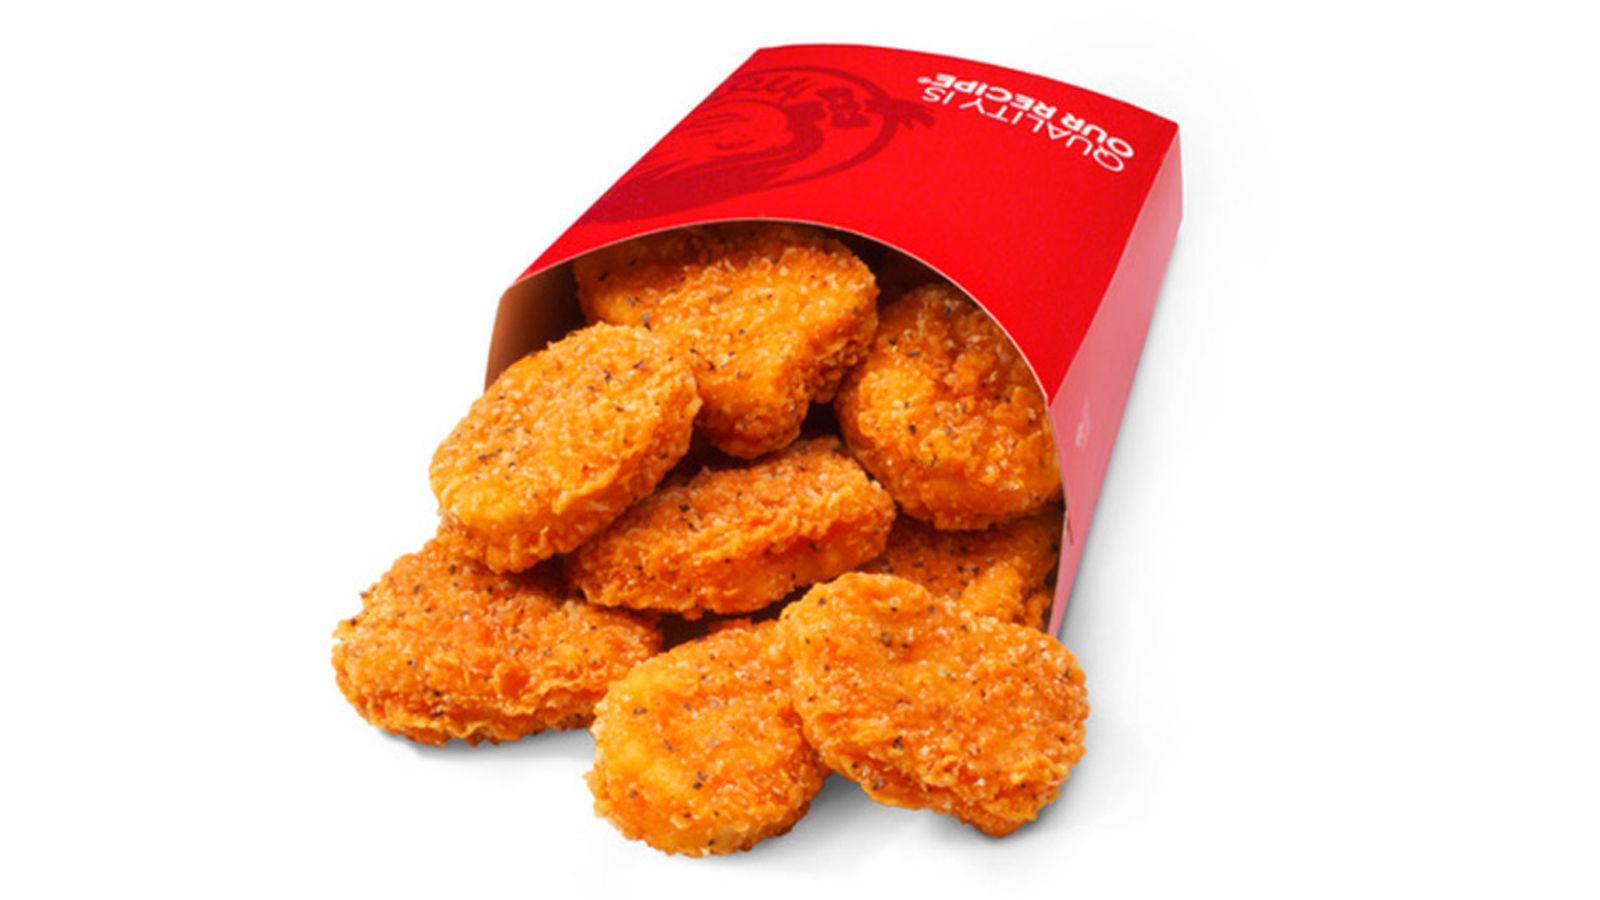 A hunger for chicken nuggets broke Twitter's retweet record